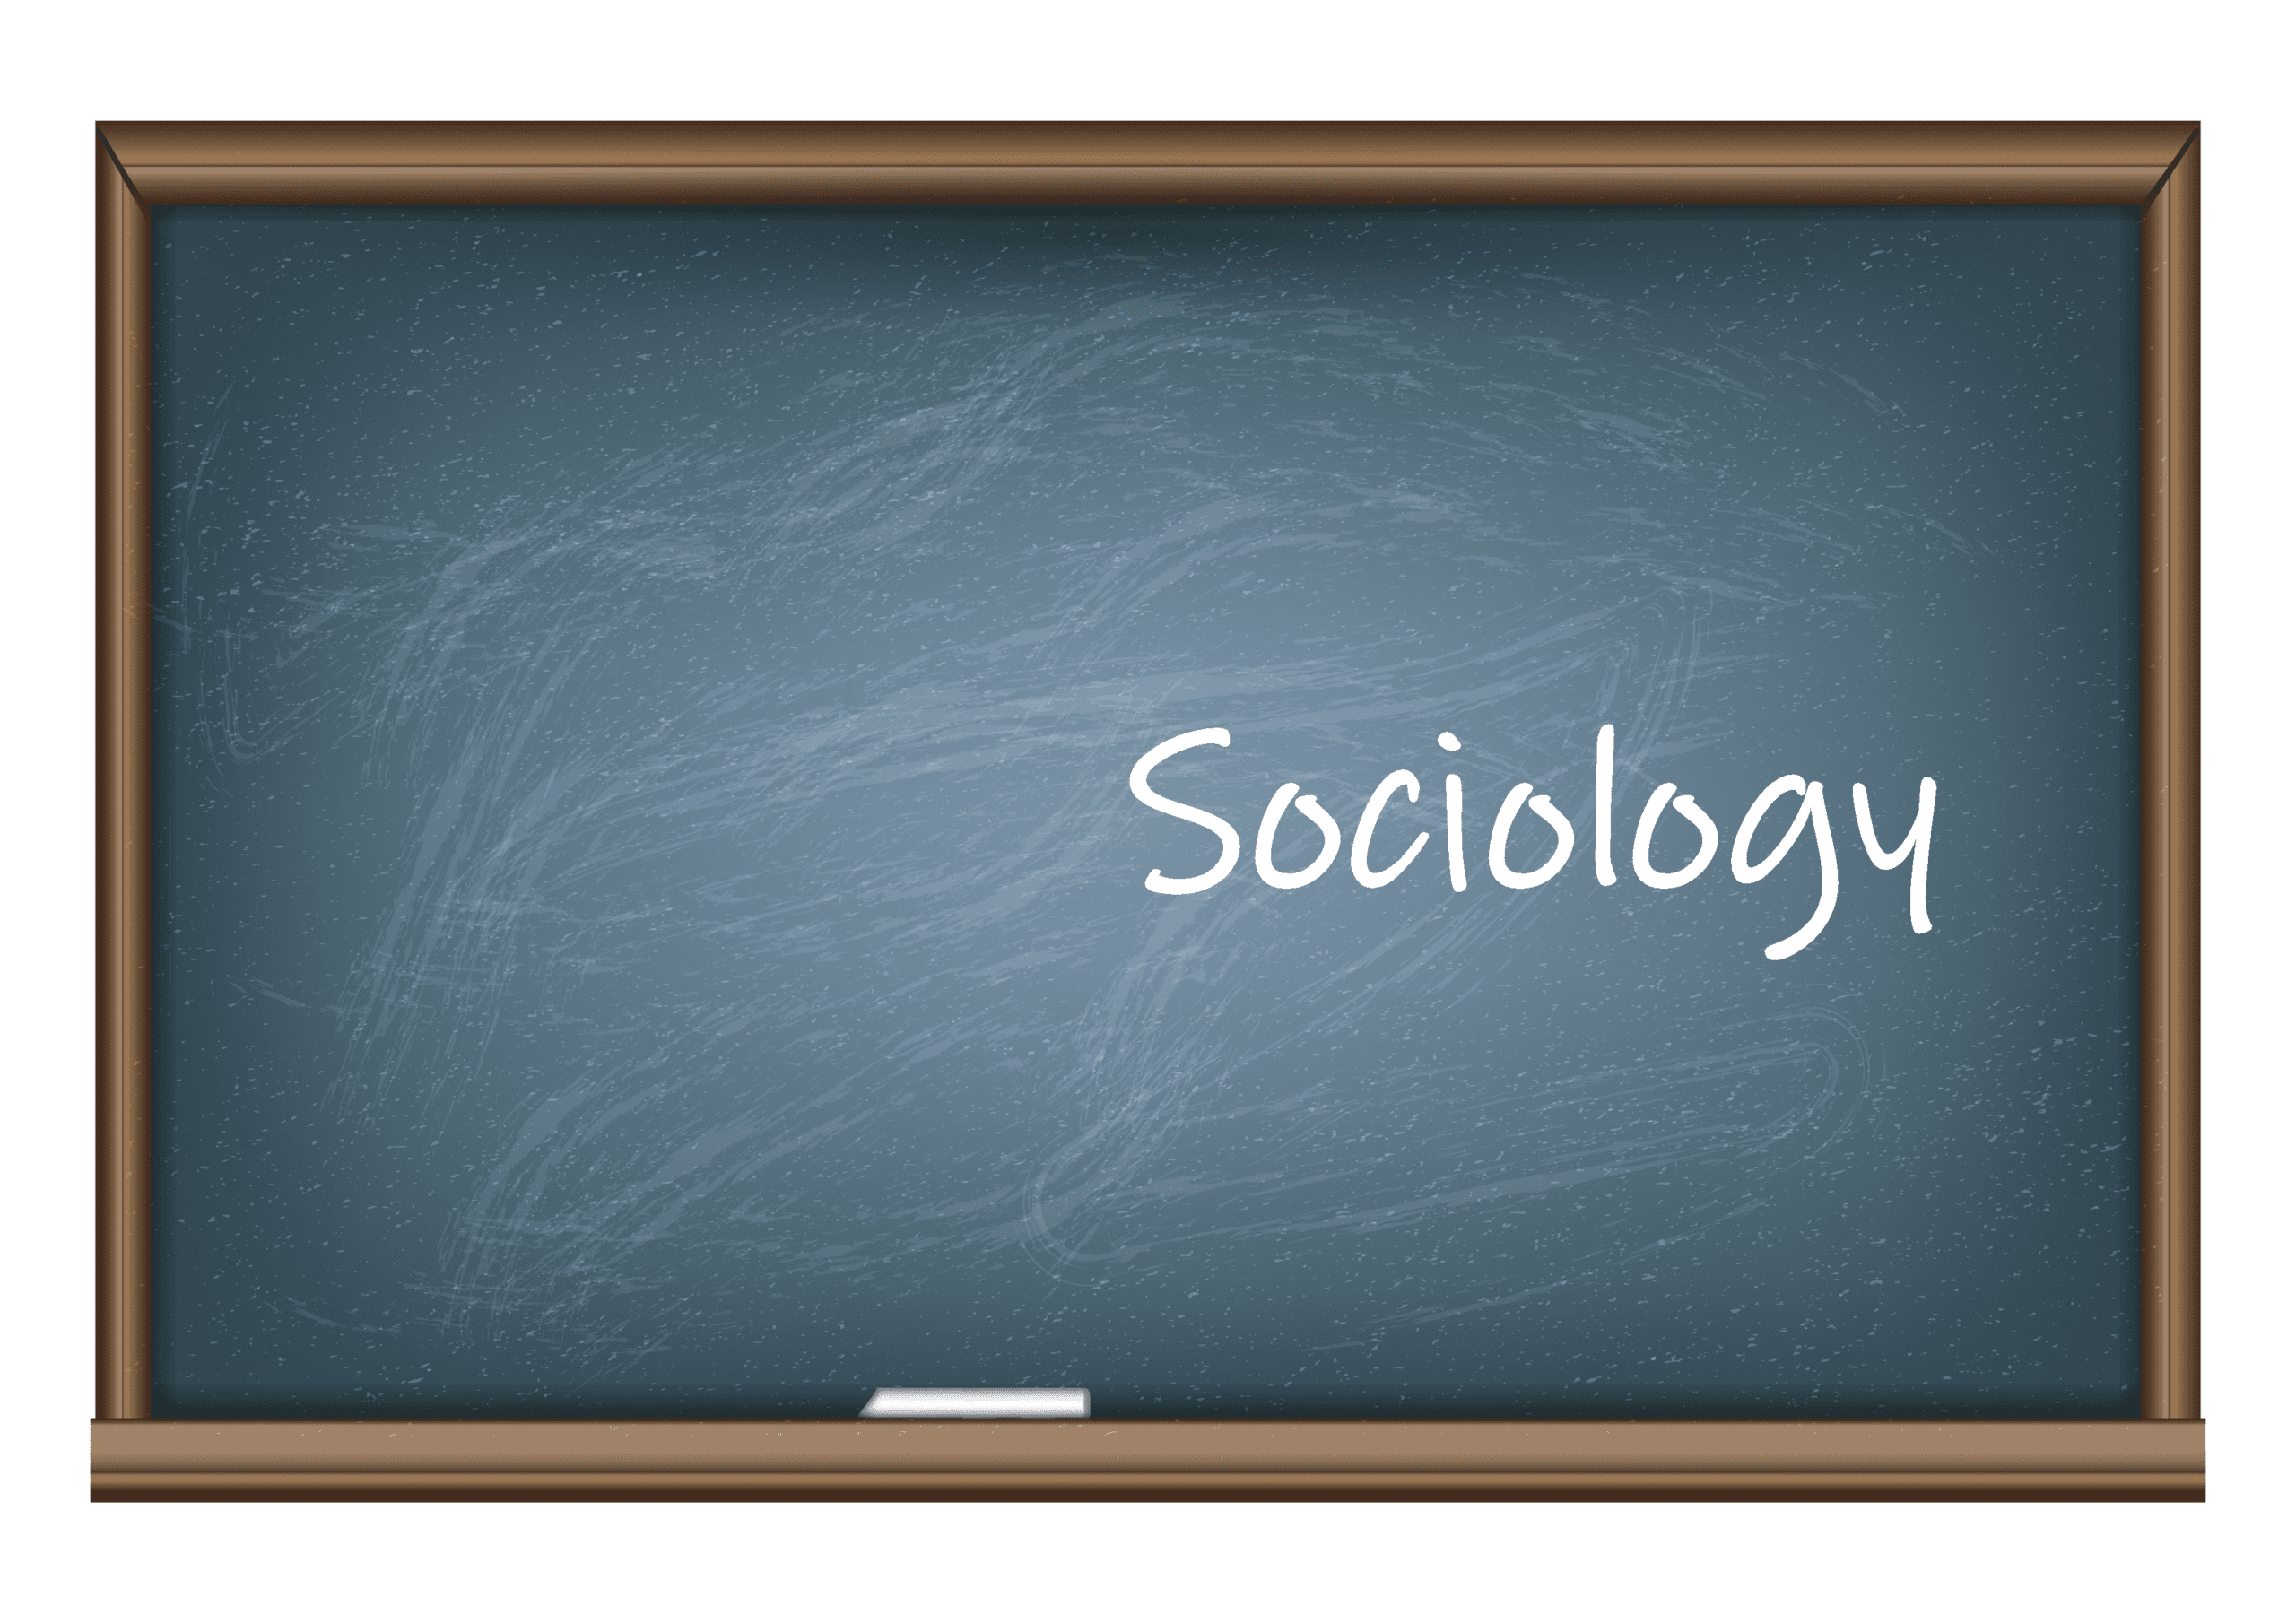 What Can Sociology Jobs Can You Do with a Bachelor’s Degree?